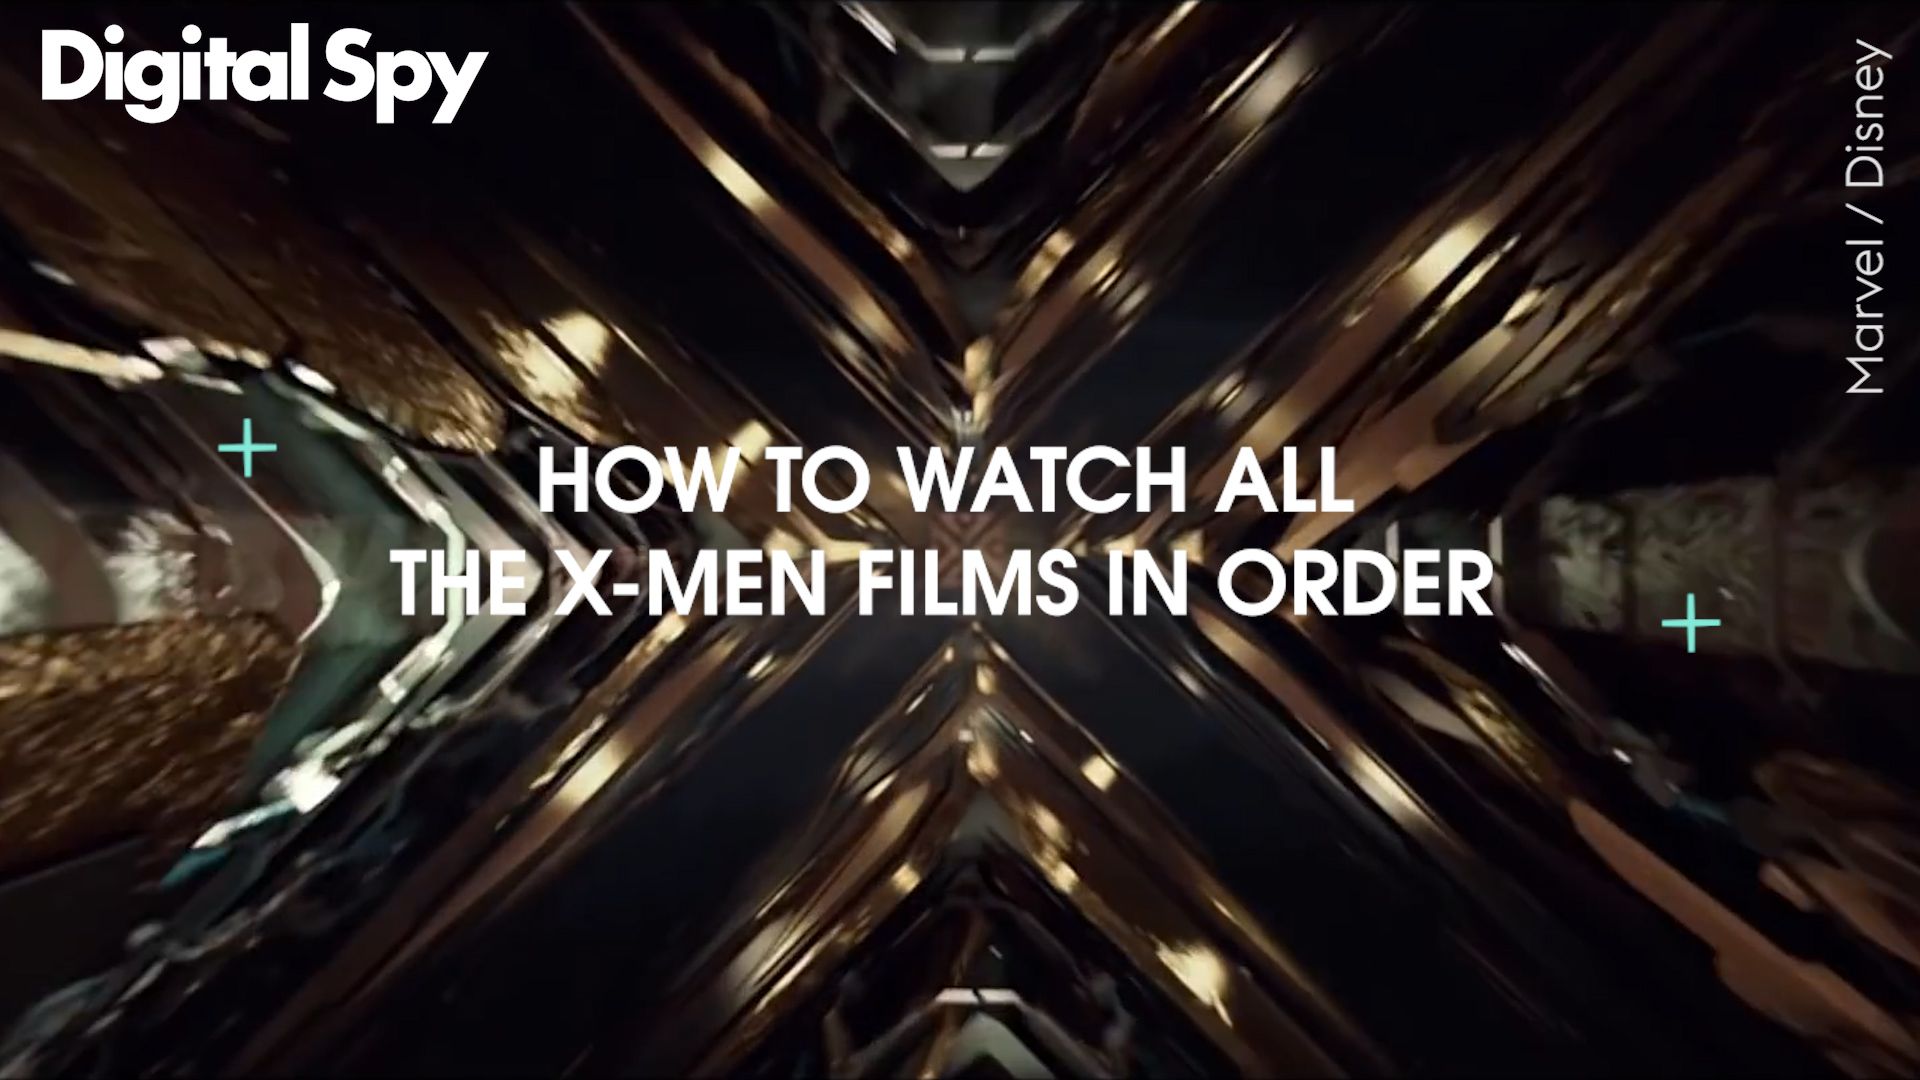 X-Men movies in order: Watch in chronological order